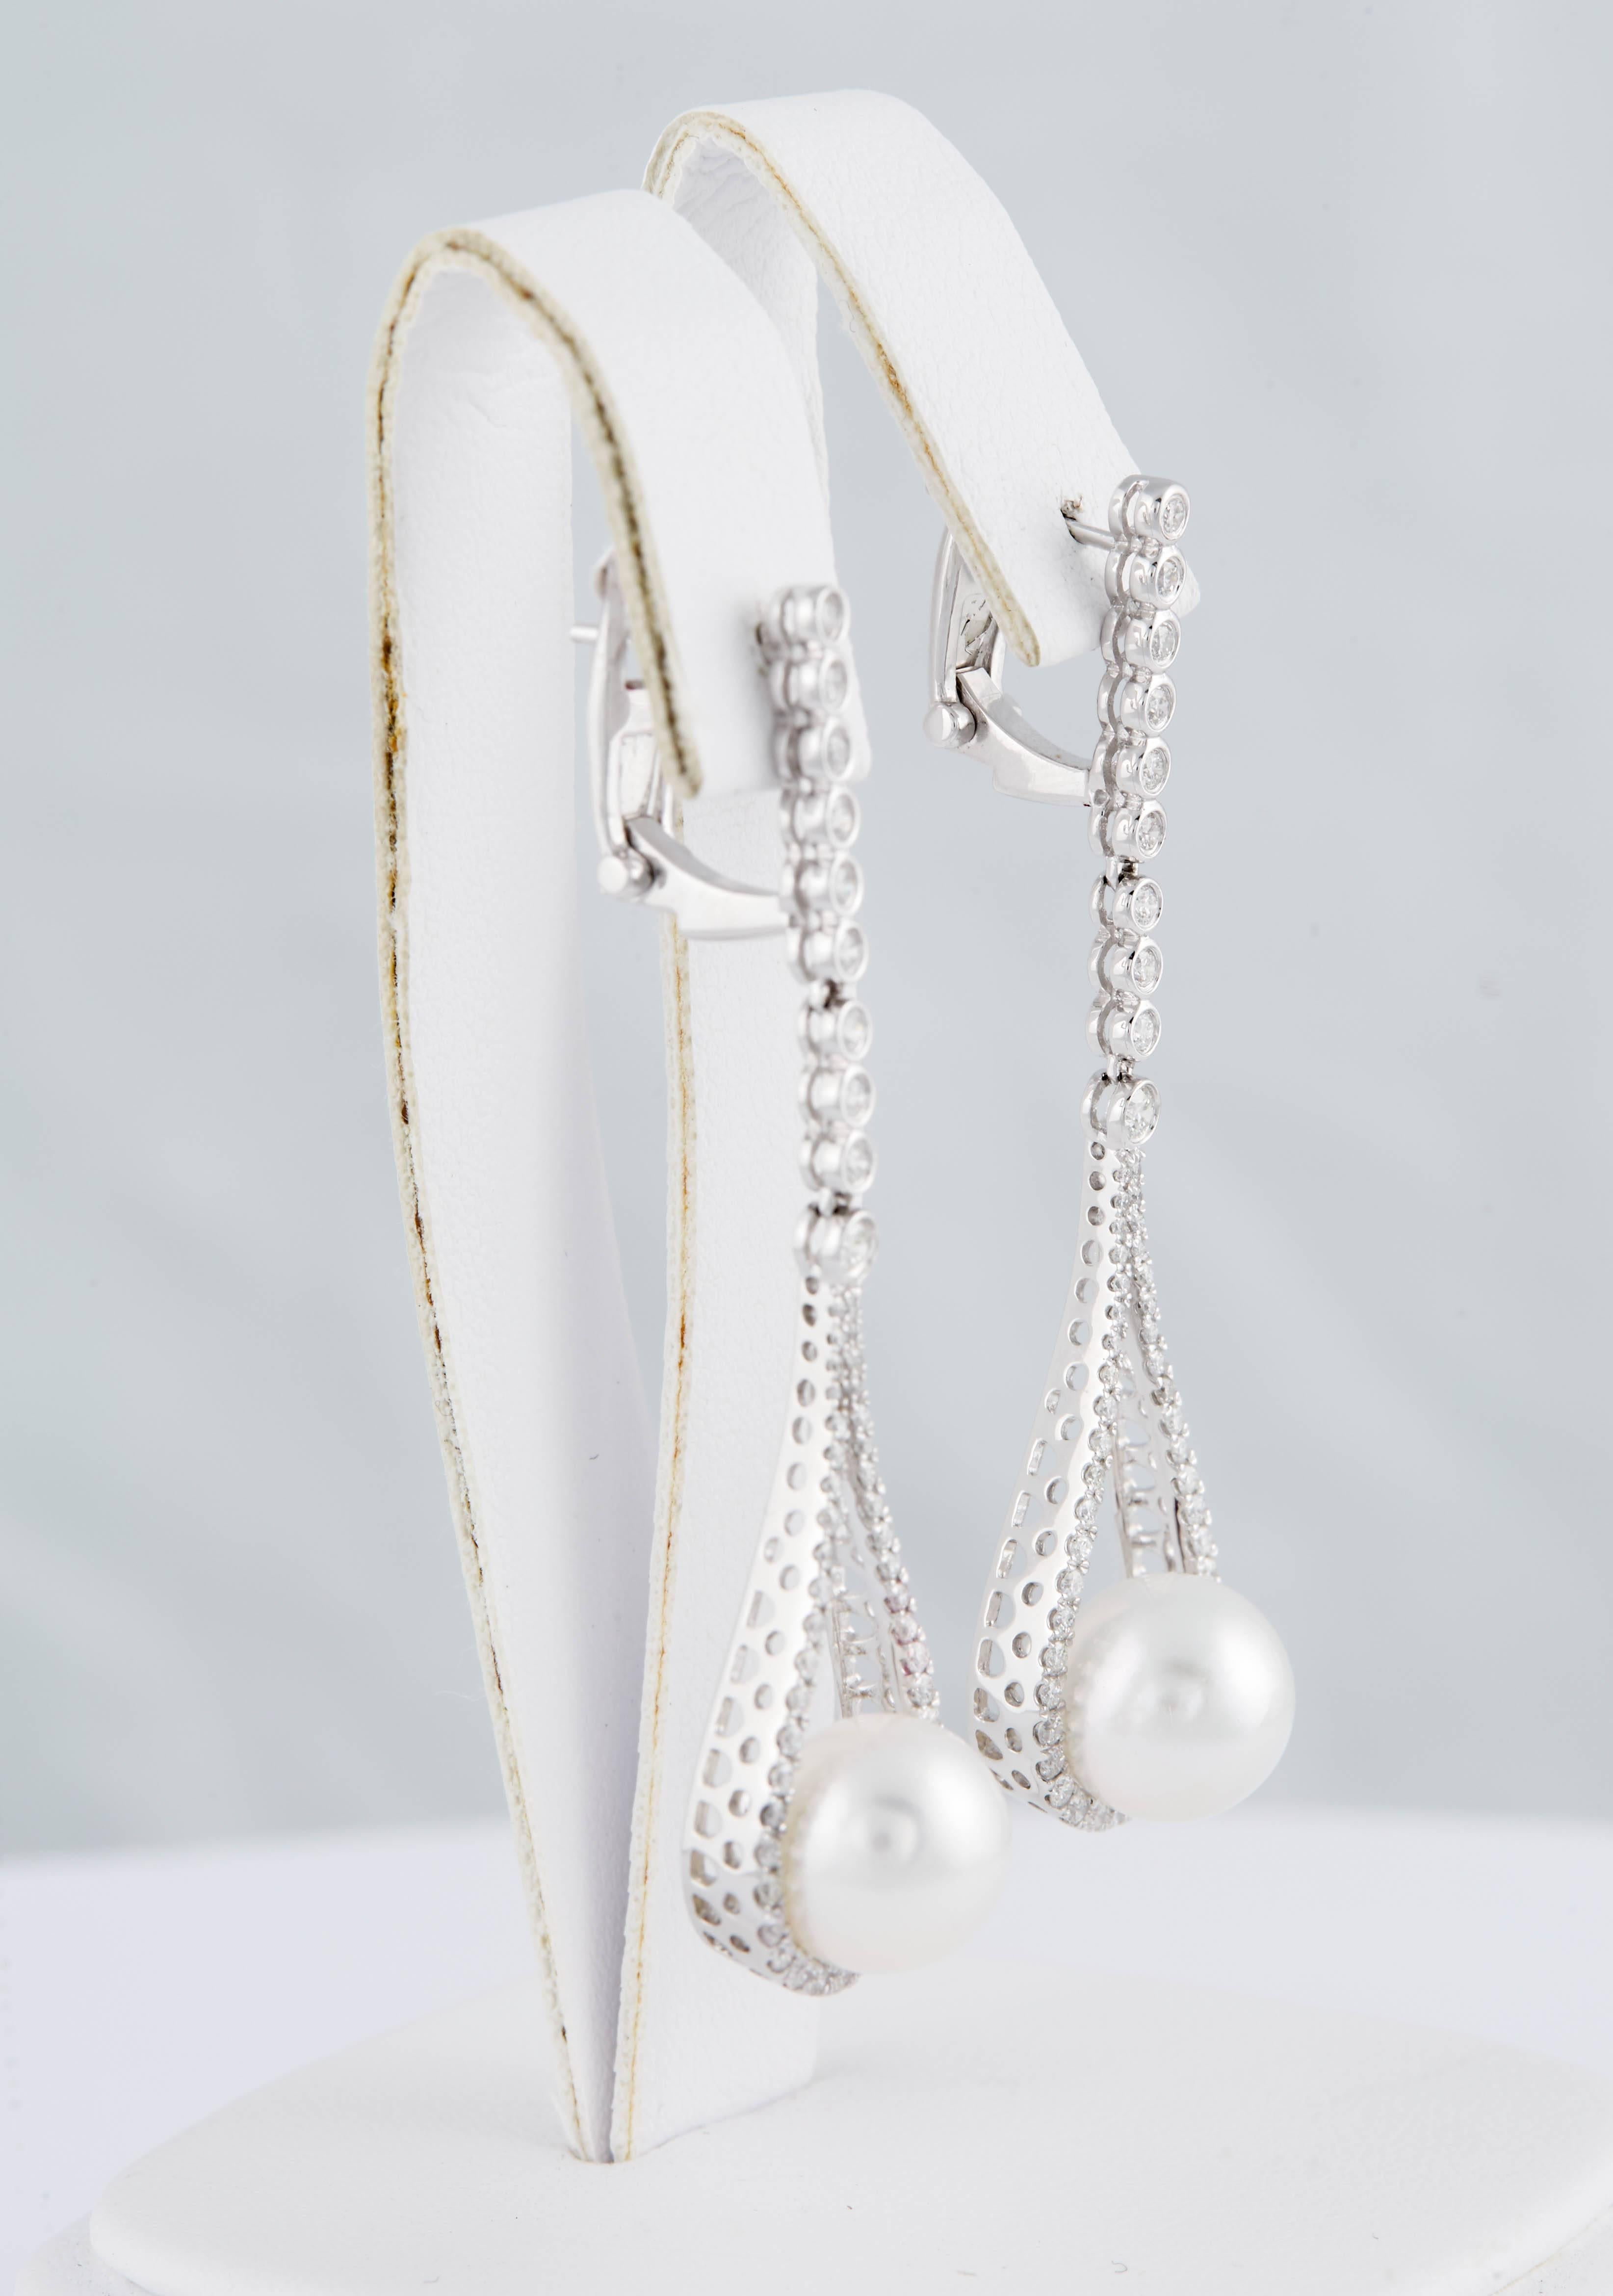 18K White Gold drop earrings featuring two South Sea Pearls measuring 9-10mm and 110 Diamonds 0.92 carats.
Color G
Clarity SI